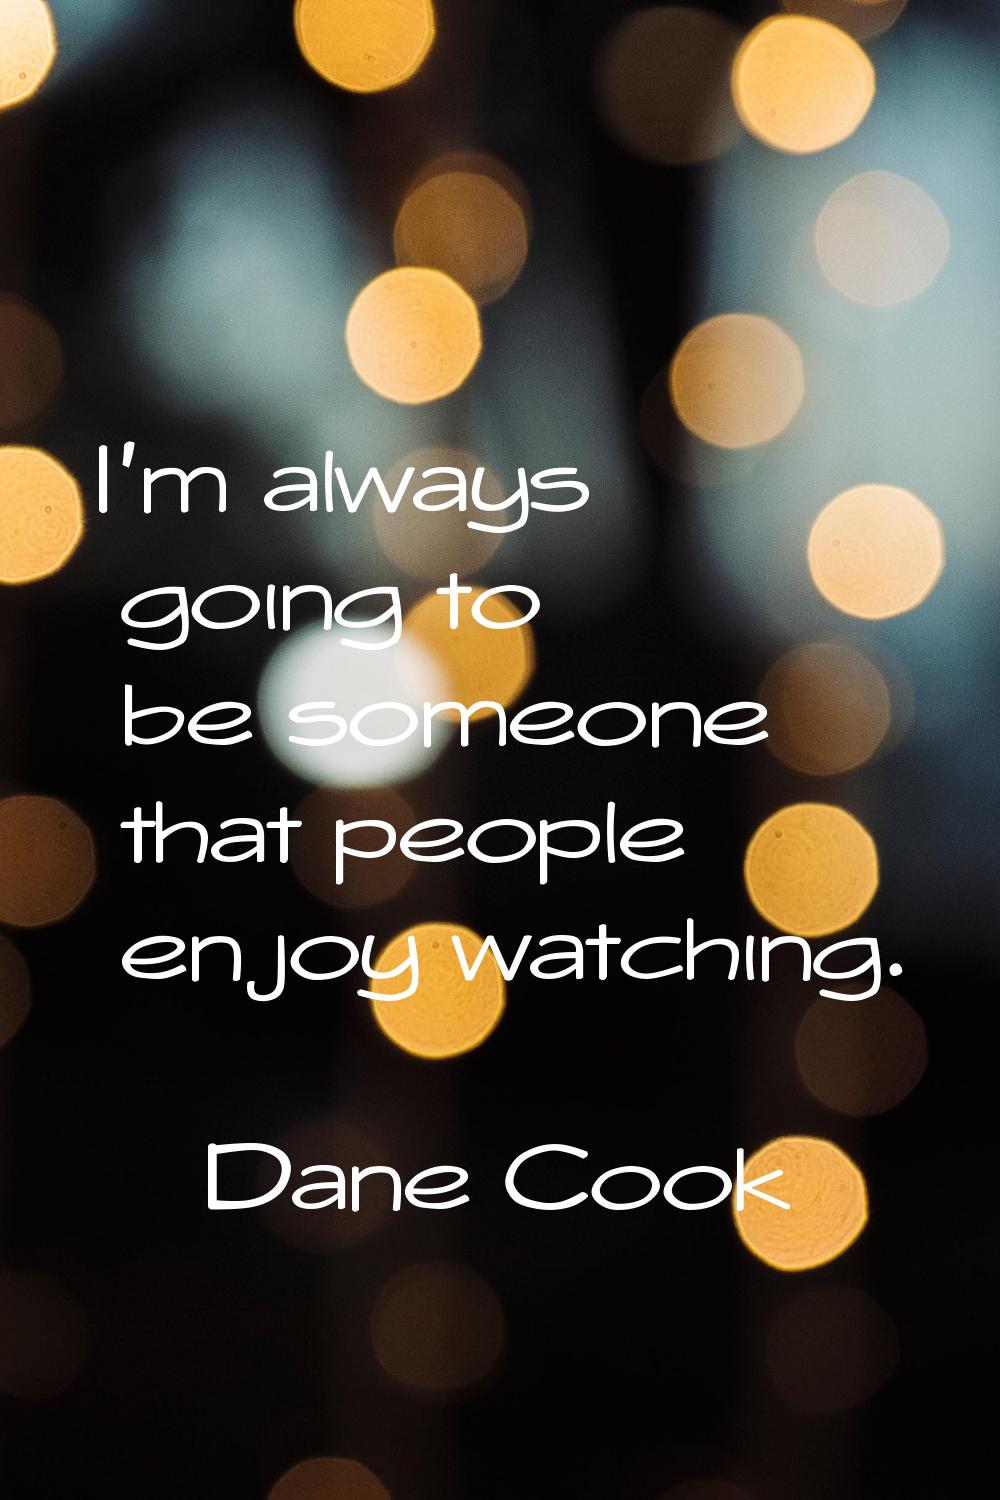 I'm always going to be someone that people enjoy watching.